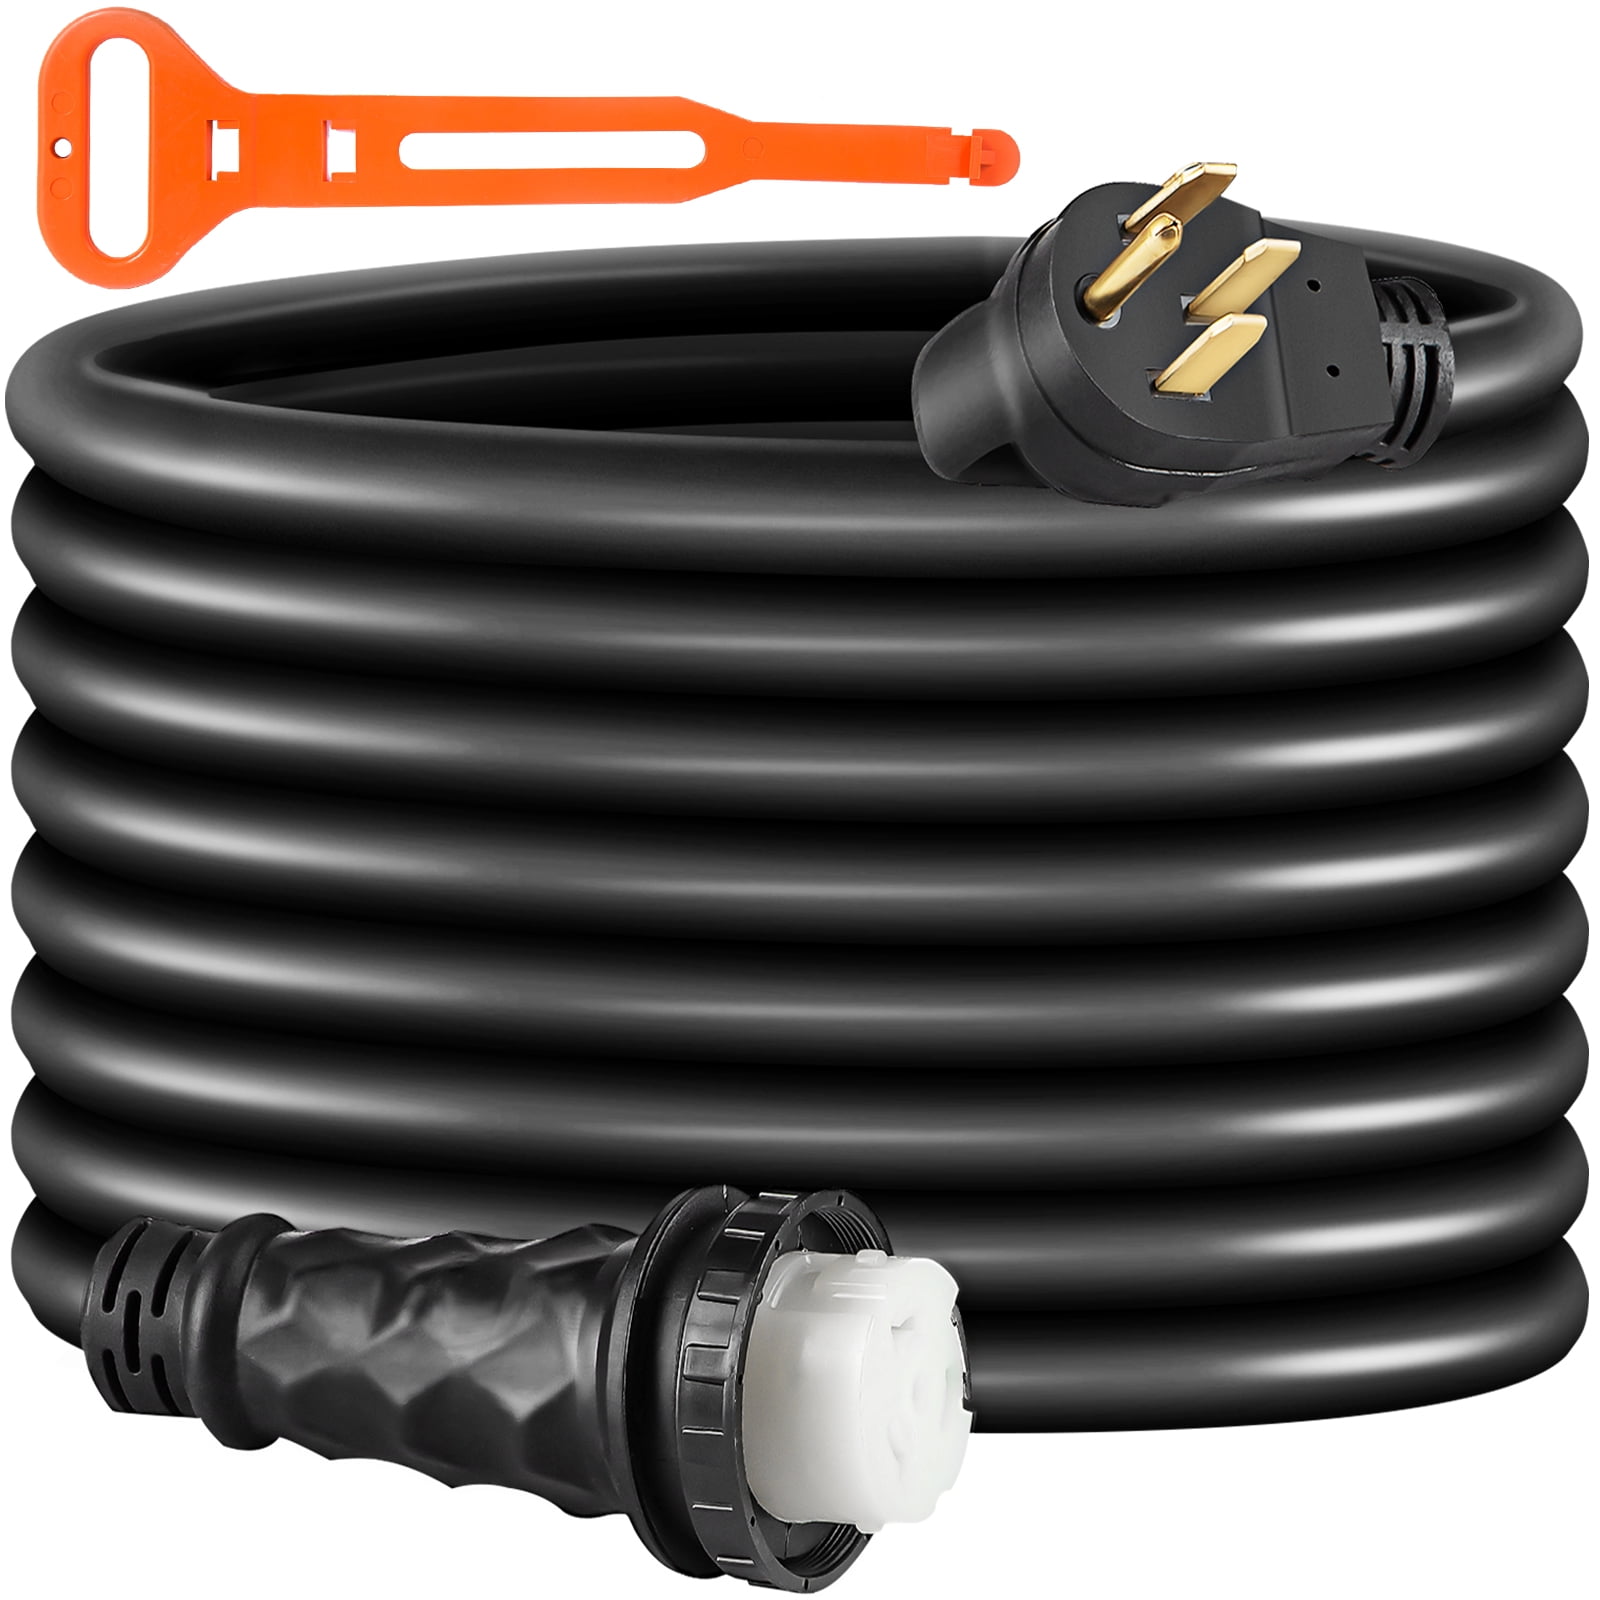 CCI TWIST LOCK EXTENSION CORD, 50 FT, 1 OUTLET, 09208